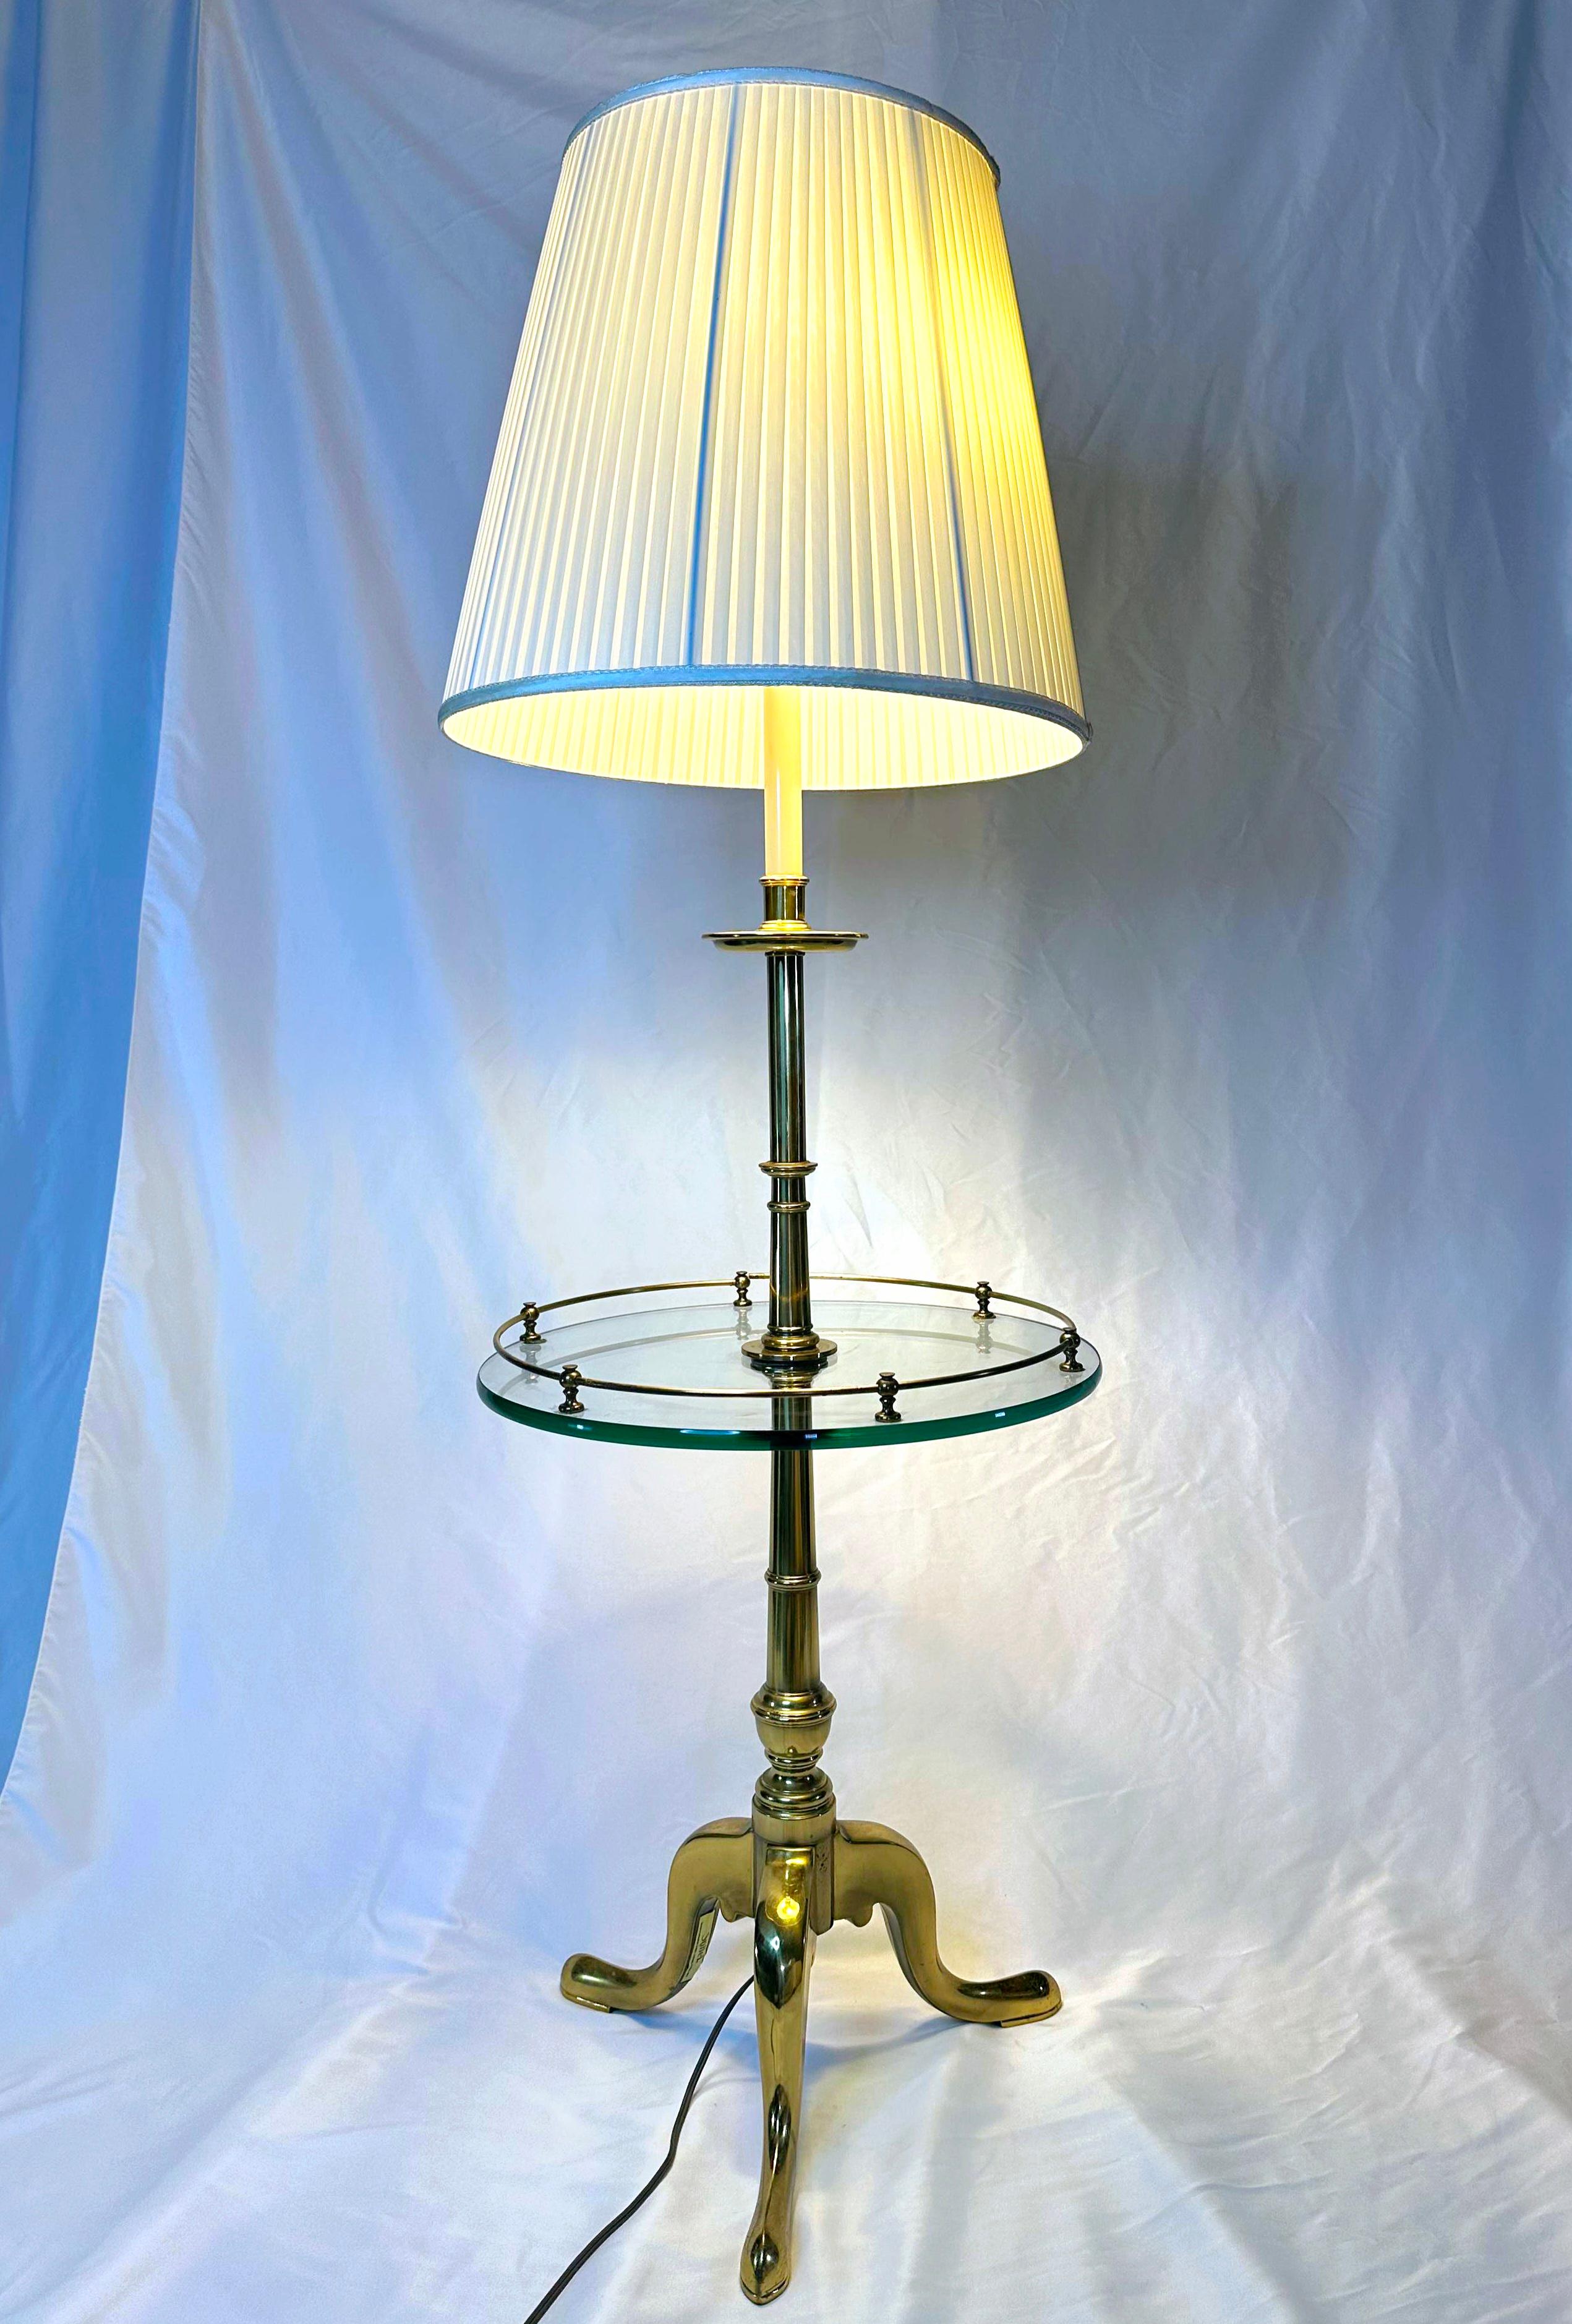 French Provincial Stiffel Floor Lamp With Glass Table and tripod legs 31